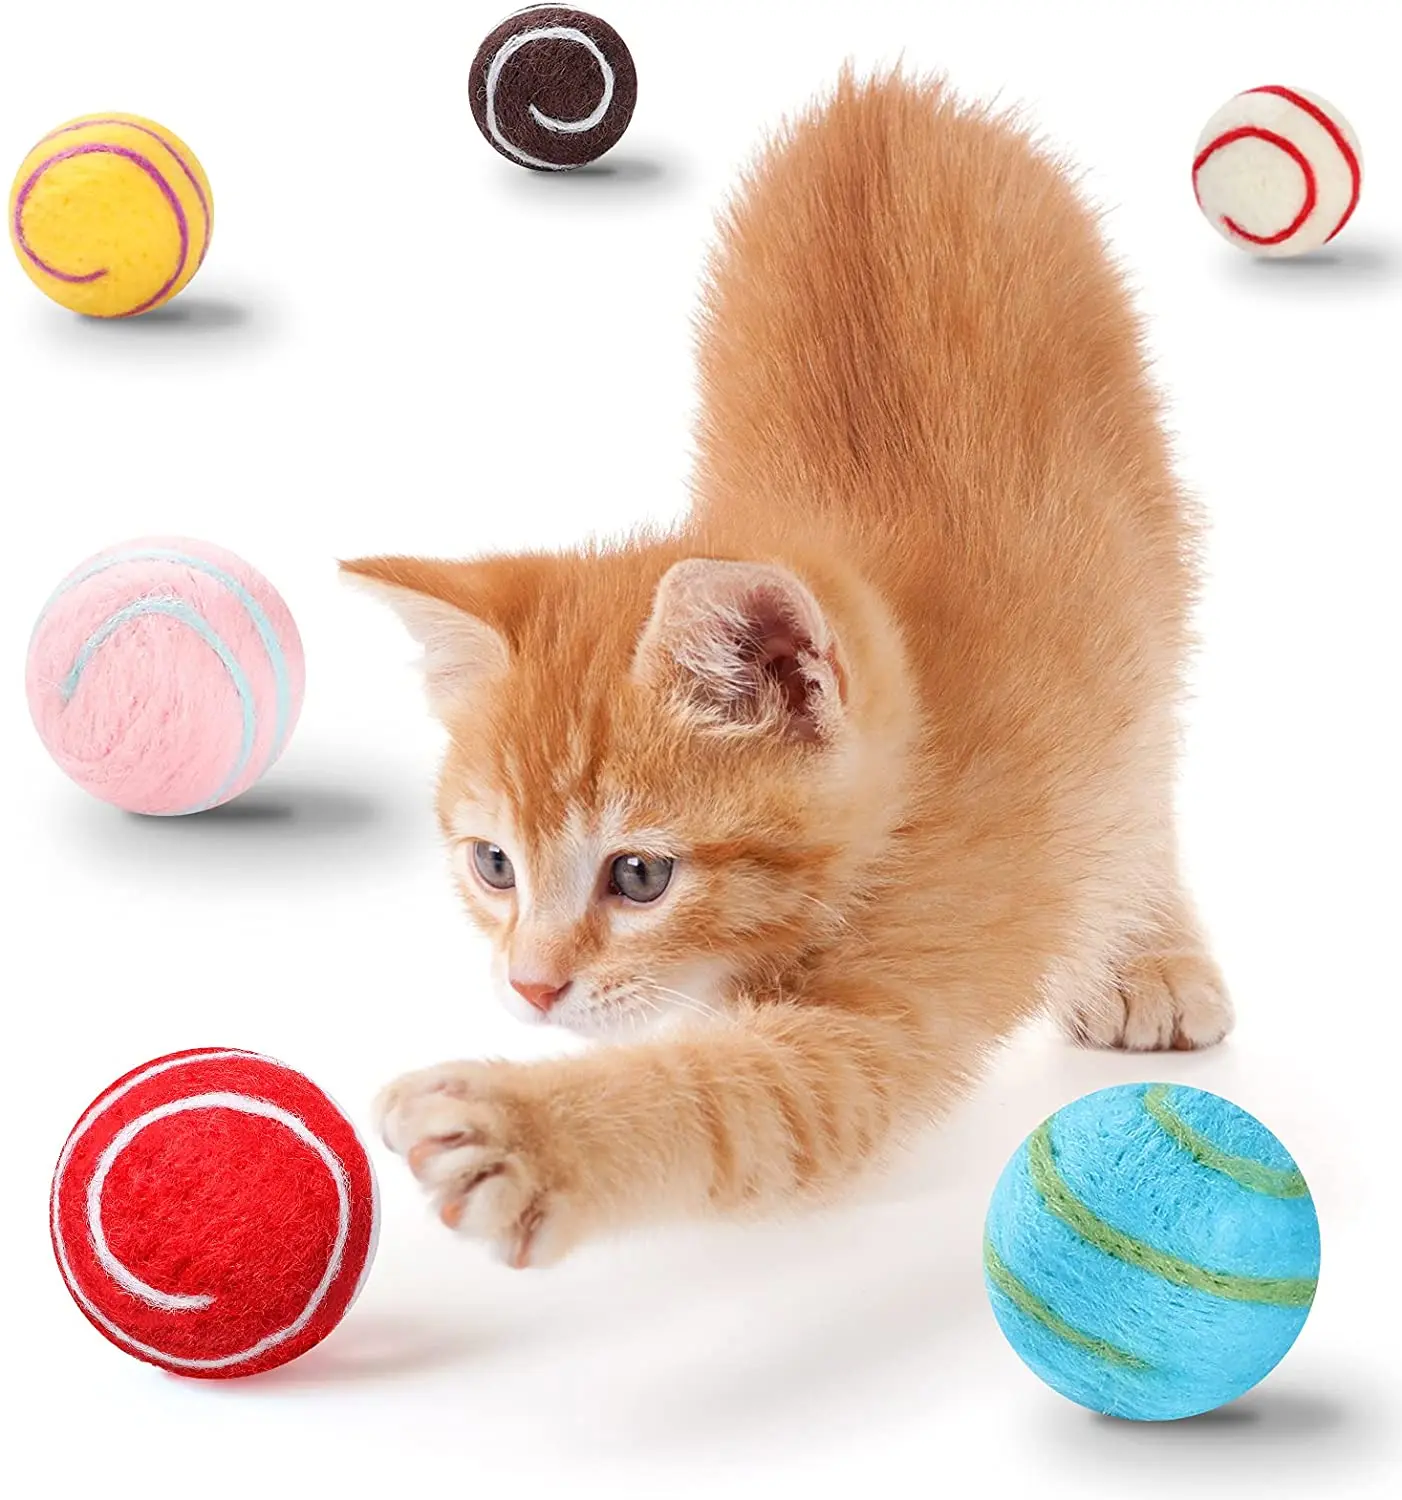 Comfy Pet Supplies ,Set of 6,-100% Wool Felt Ball Toys for Cats and  Kittens, Handmade Colorful Eco-Friendly Cat Wool Balls,6 colors 